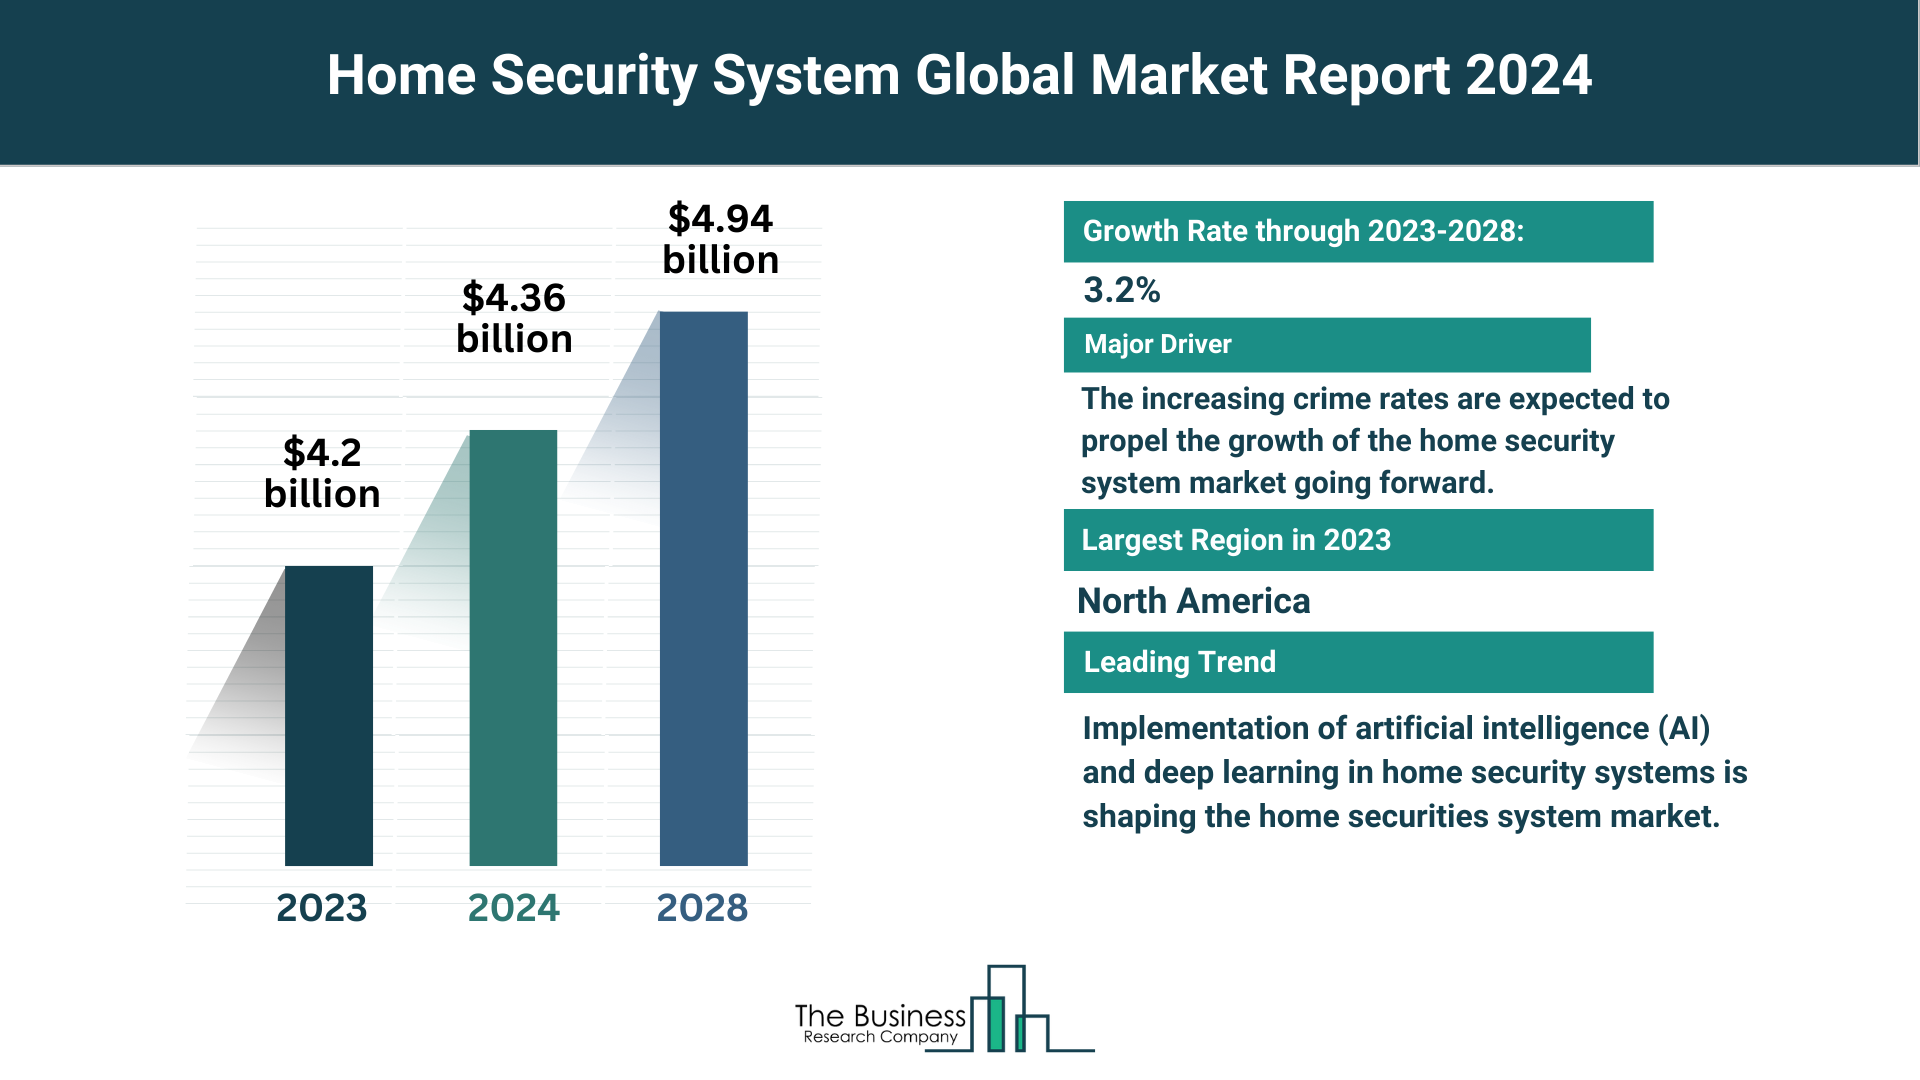 Global Home Security System Market